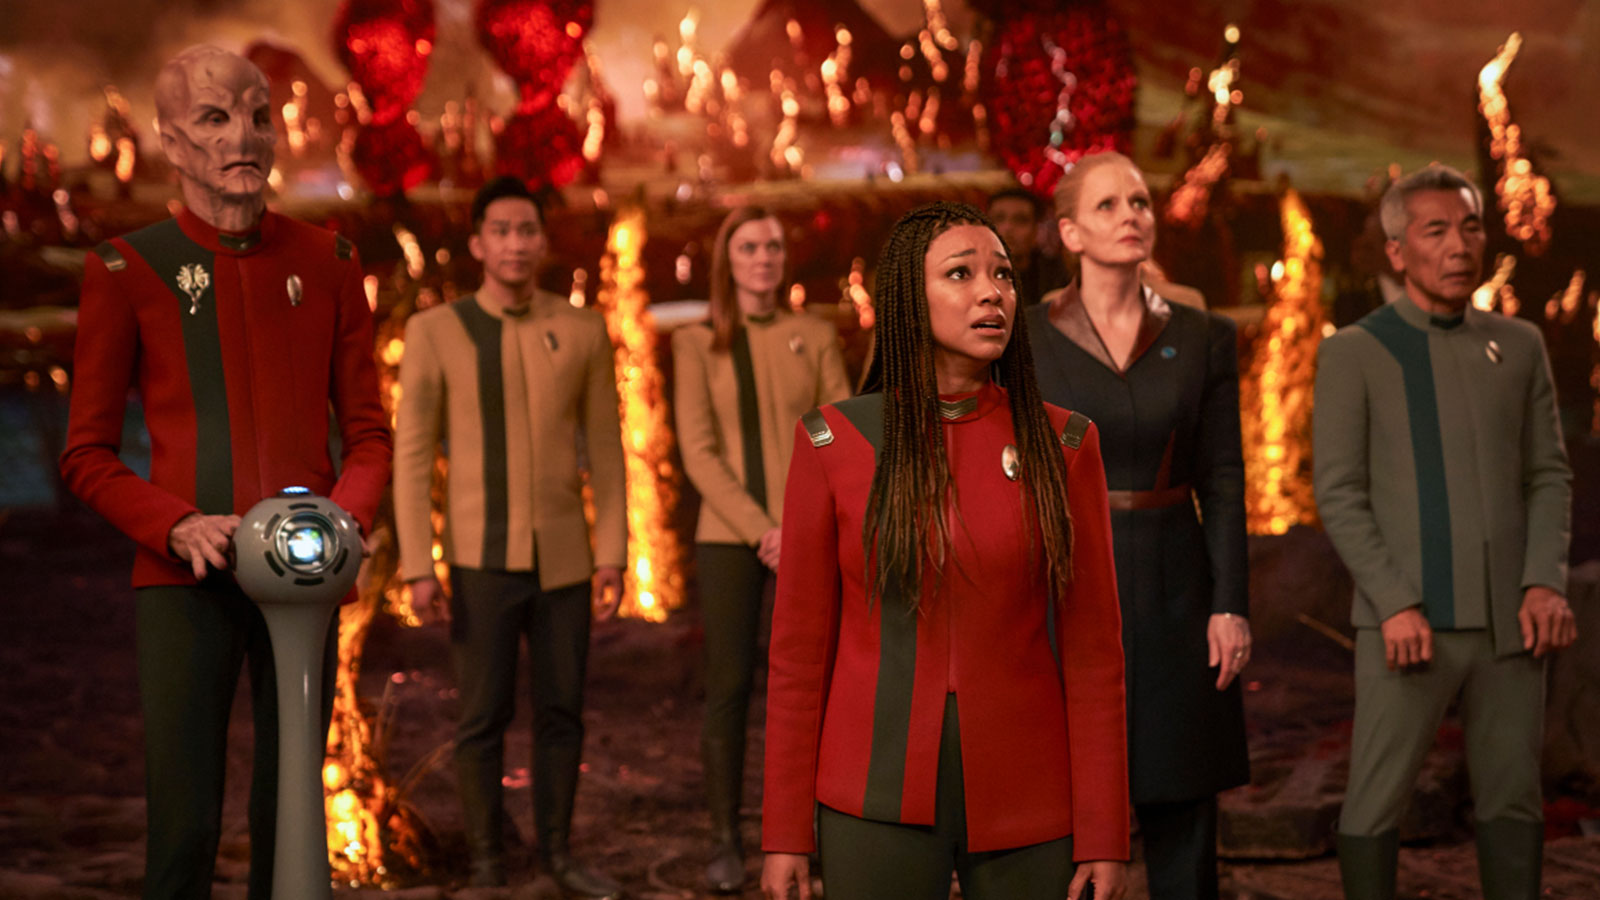 Star Trek: Discovery Season 4 Finale “Coming Home” Review: Our fates; always interconnected